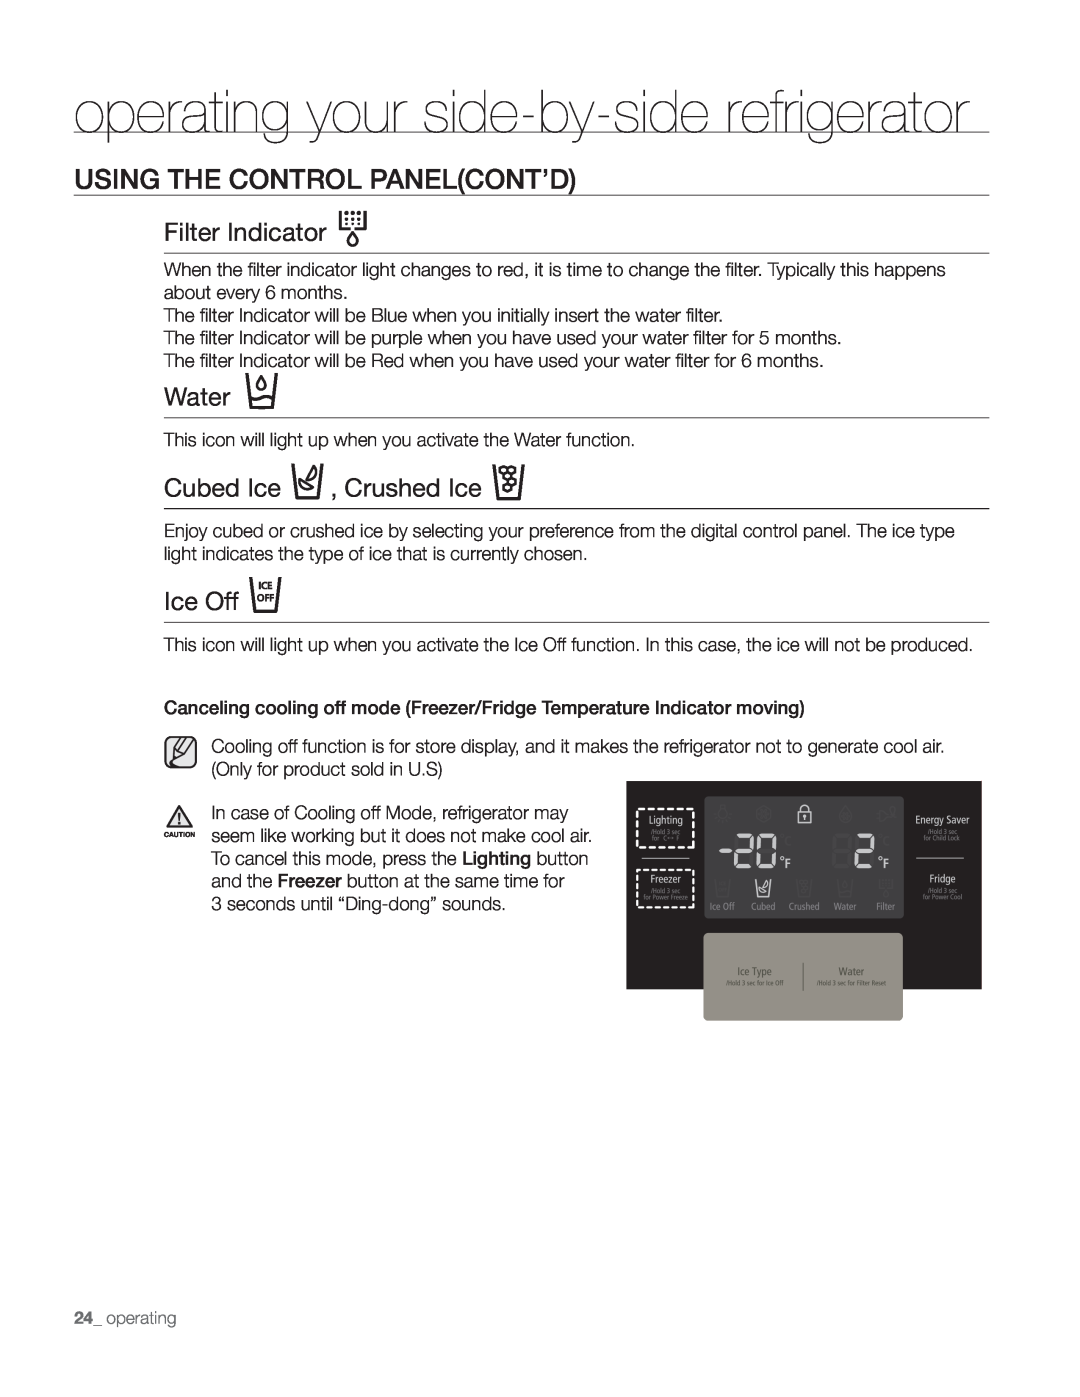 Samsung DA68-01890Q user manual Using The Control Panelcont’D, Filter Indicator, Water, Cubed Ice , Crushed Ice, Ice Off 